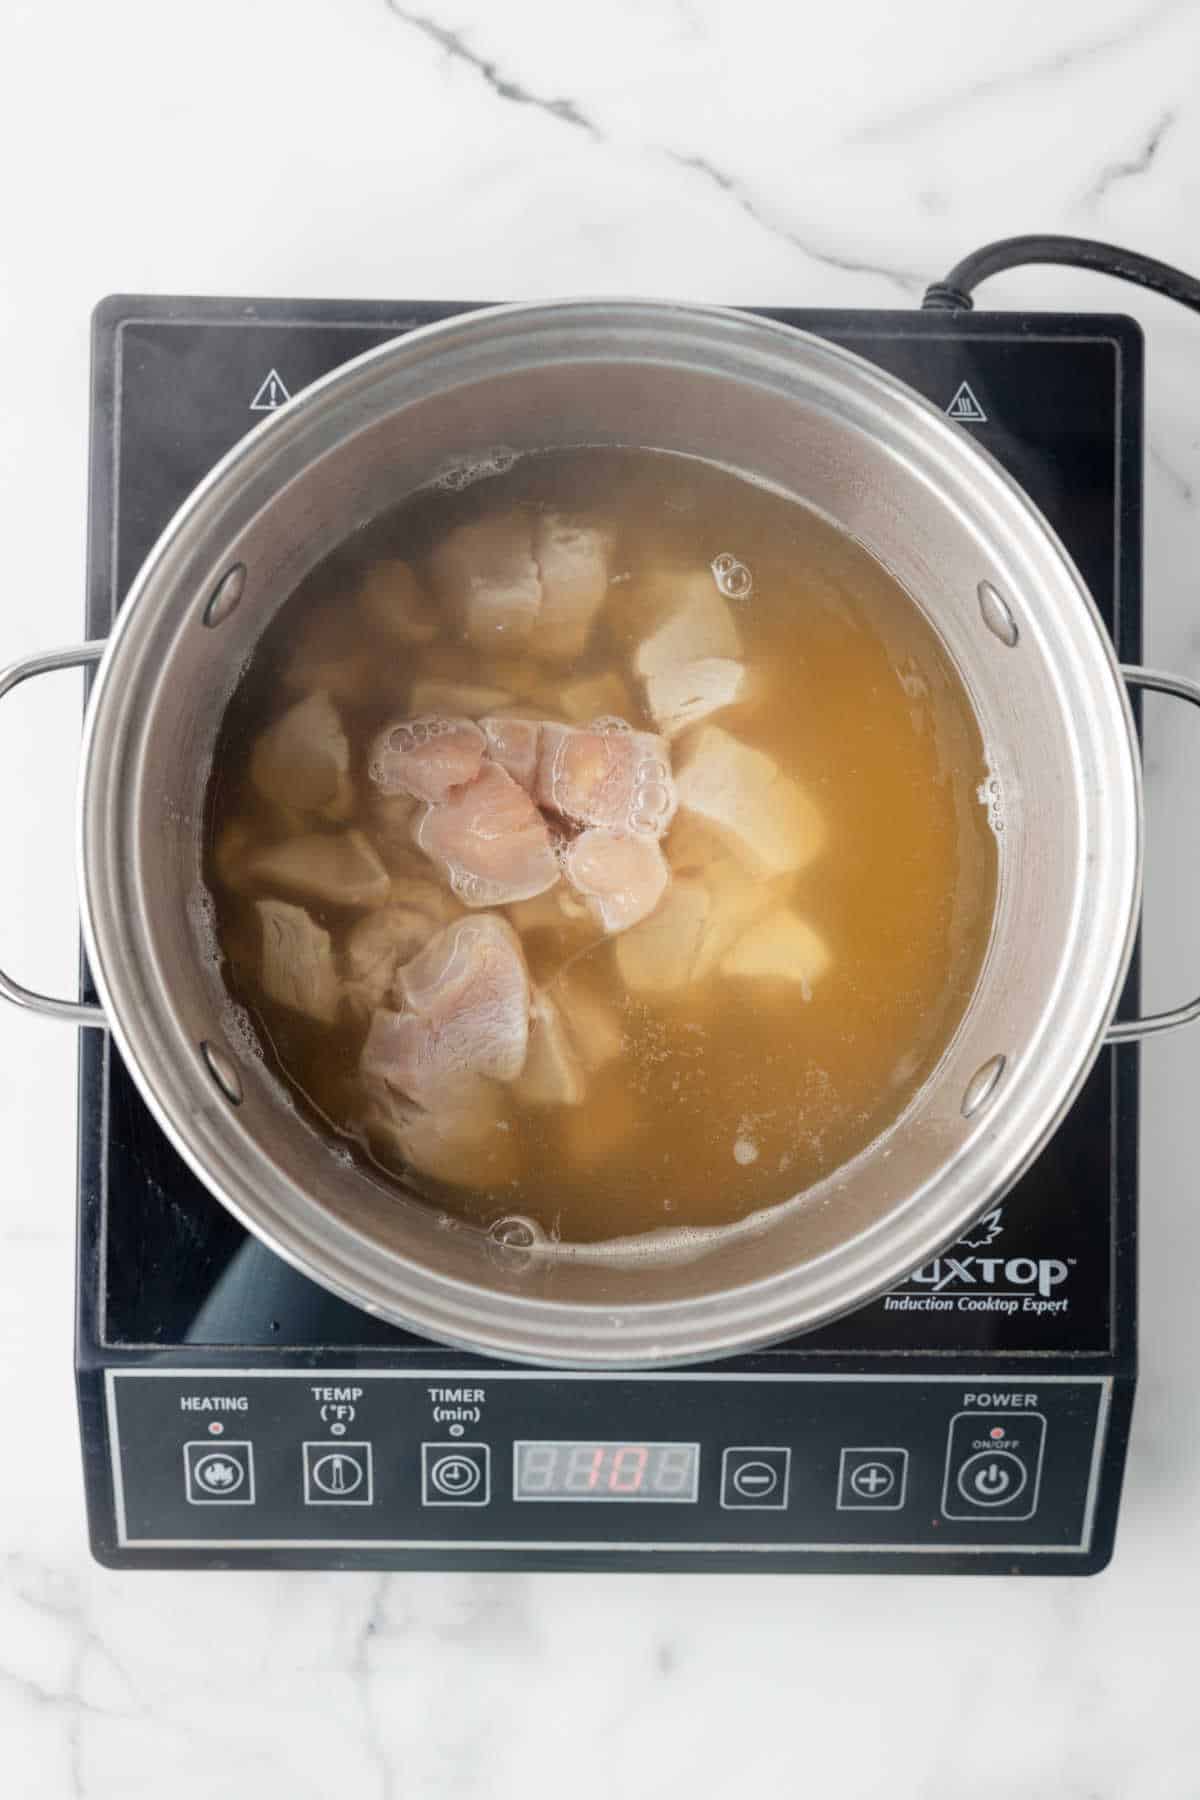 Cubed chicken breast in a pot of chicken broth.